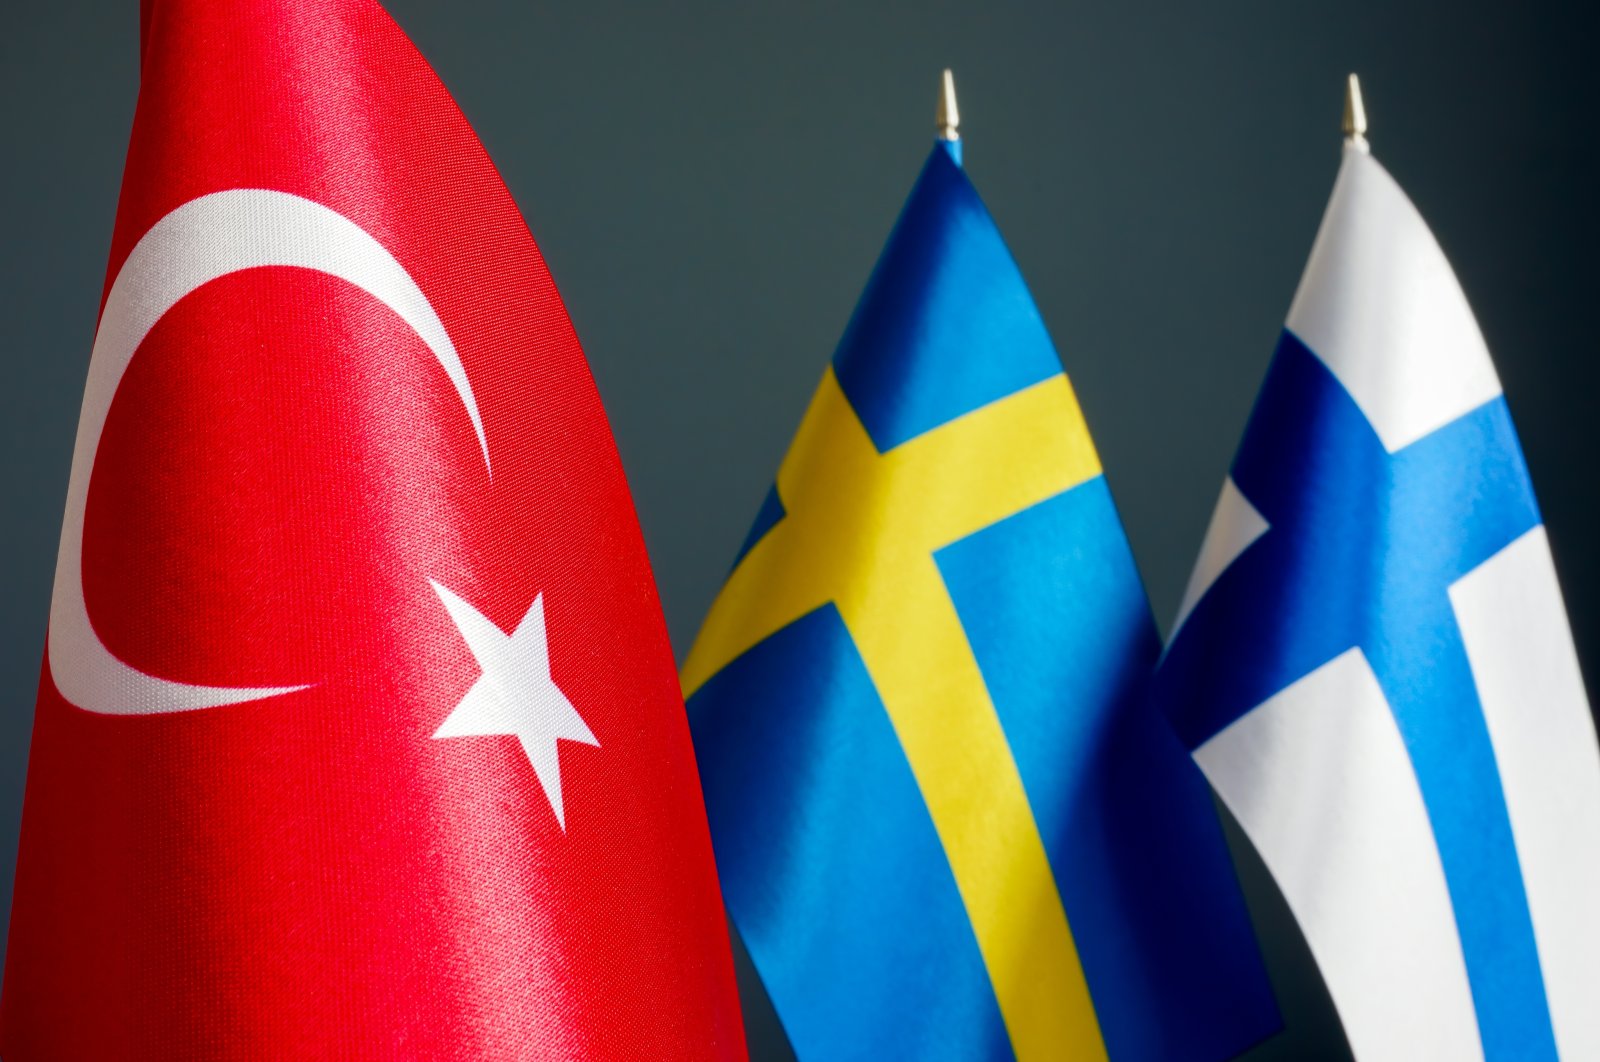 From left to right, the flags of Turkey, Sweden and Finland are seen. (Photo by Shutterstock)